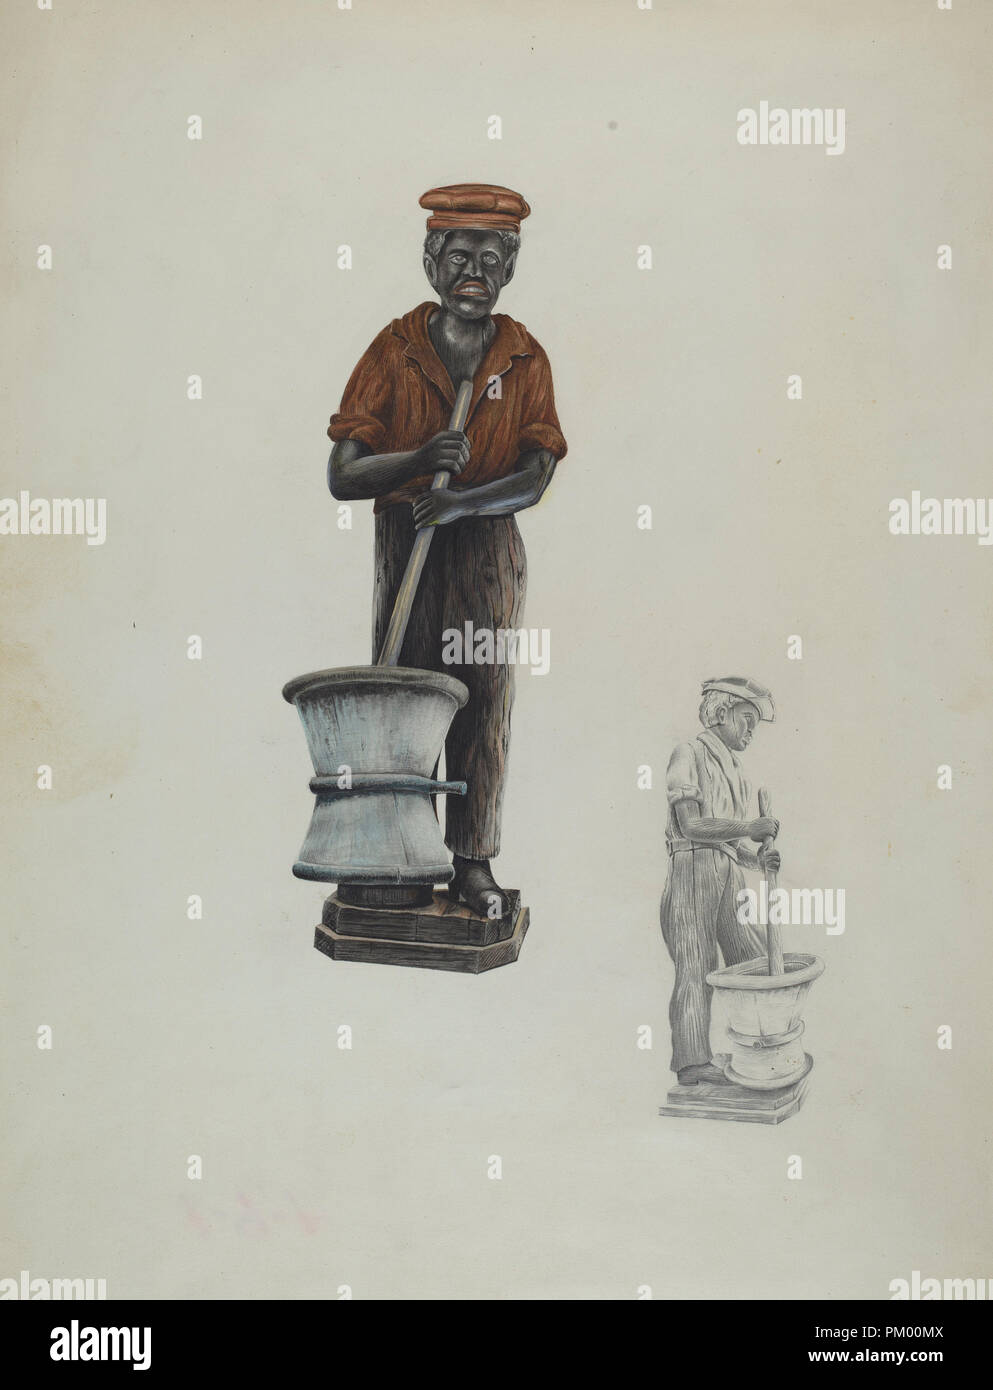 Drug Store Figure. Dated: c. 1937. Dimensions: overall: 40.7 x 30.8 cm (16 x 12 1/8 in.). Medium: watercolor, graphite, and colored pencil on paper. Museum: National Gallery of Art, Washington DC. Author: Ray Price. Stock Photo